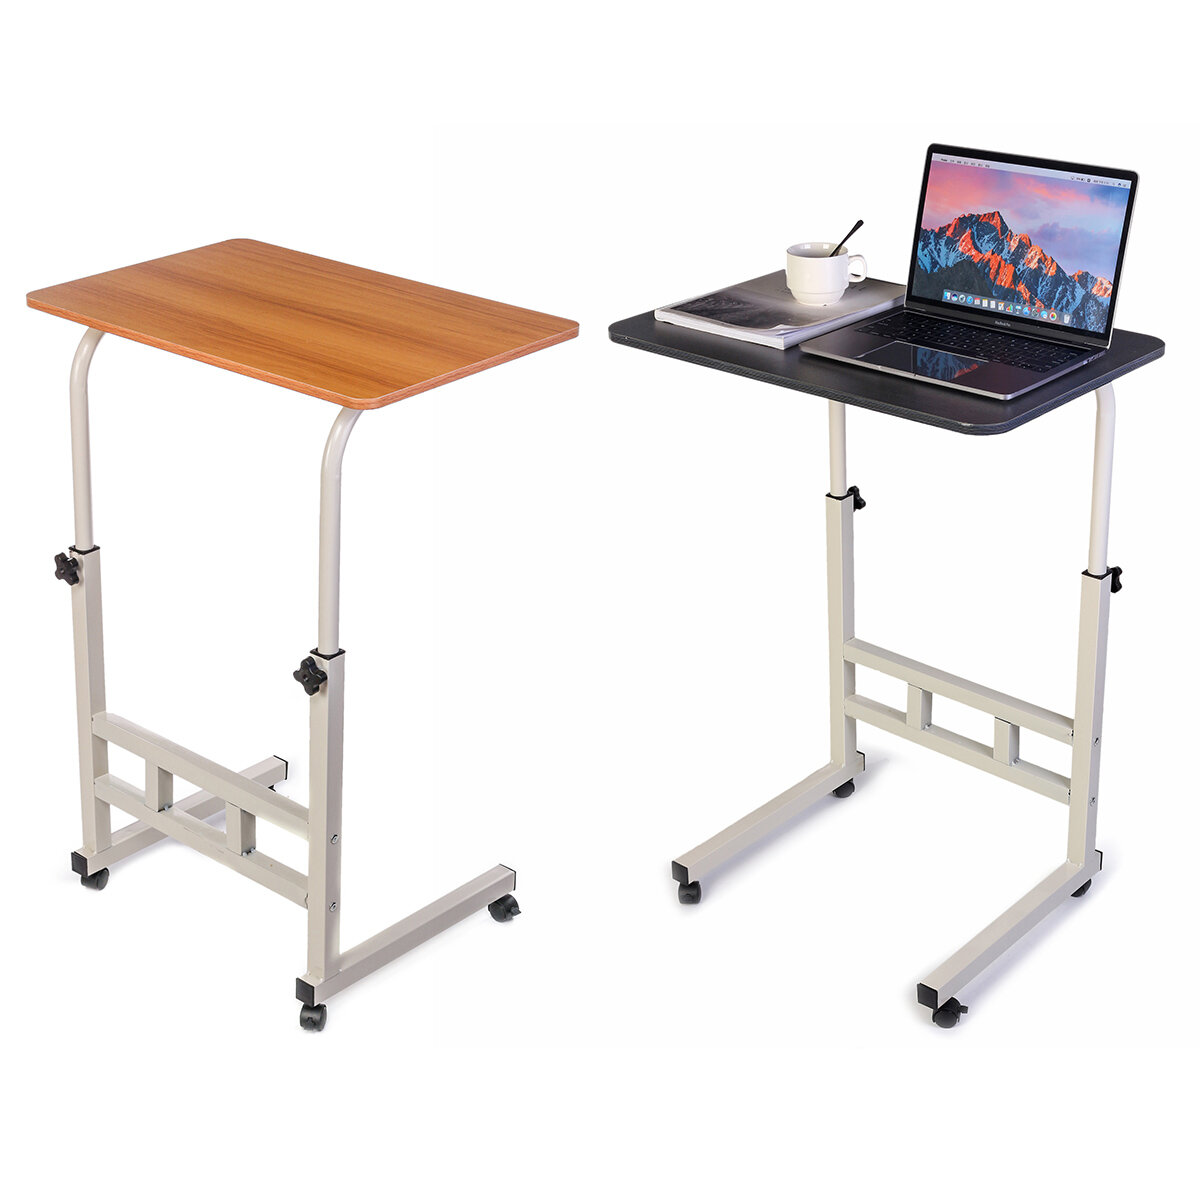 Portable Height Adjustable Macbook Desk Lazy Bedside Table Can be Lifted Standing Desk Home Furnitur